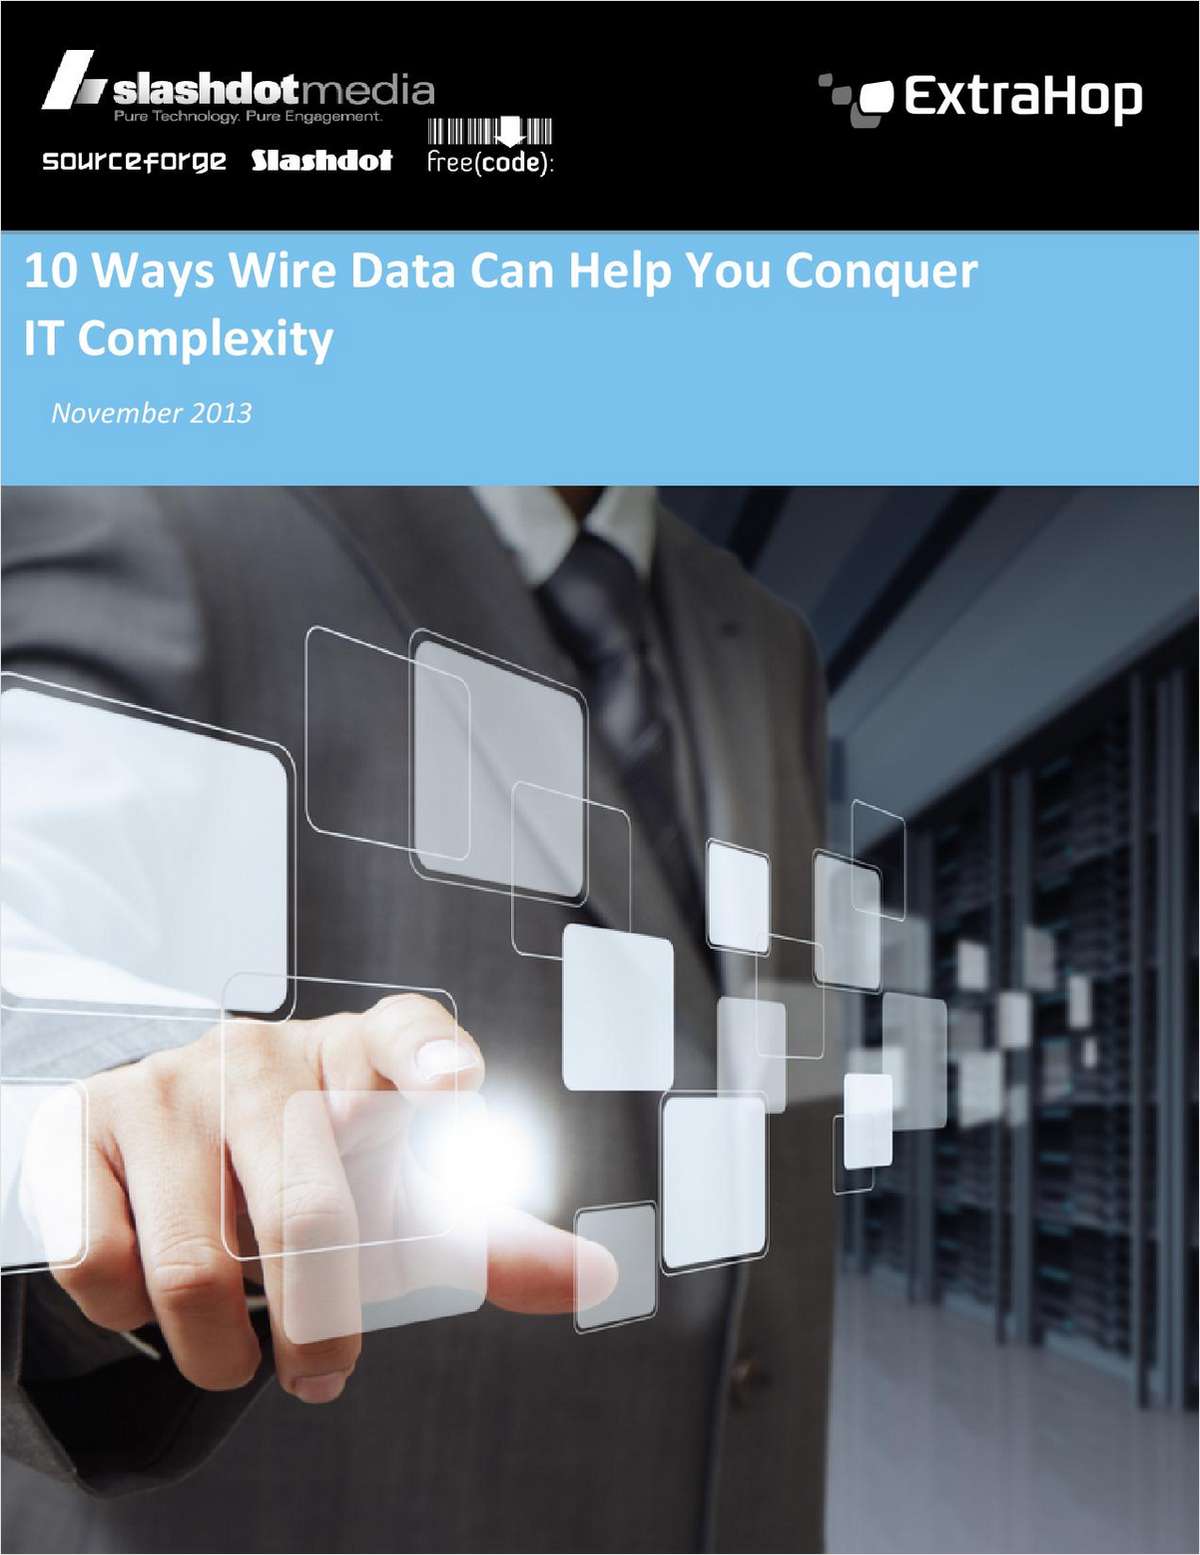 10 Ways Wire Data Helps Conquer IT Complexity